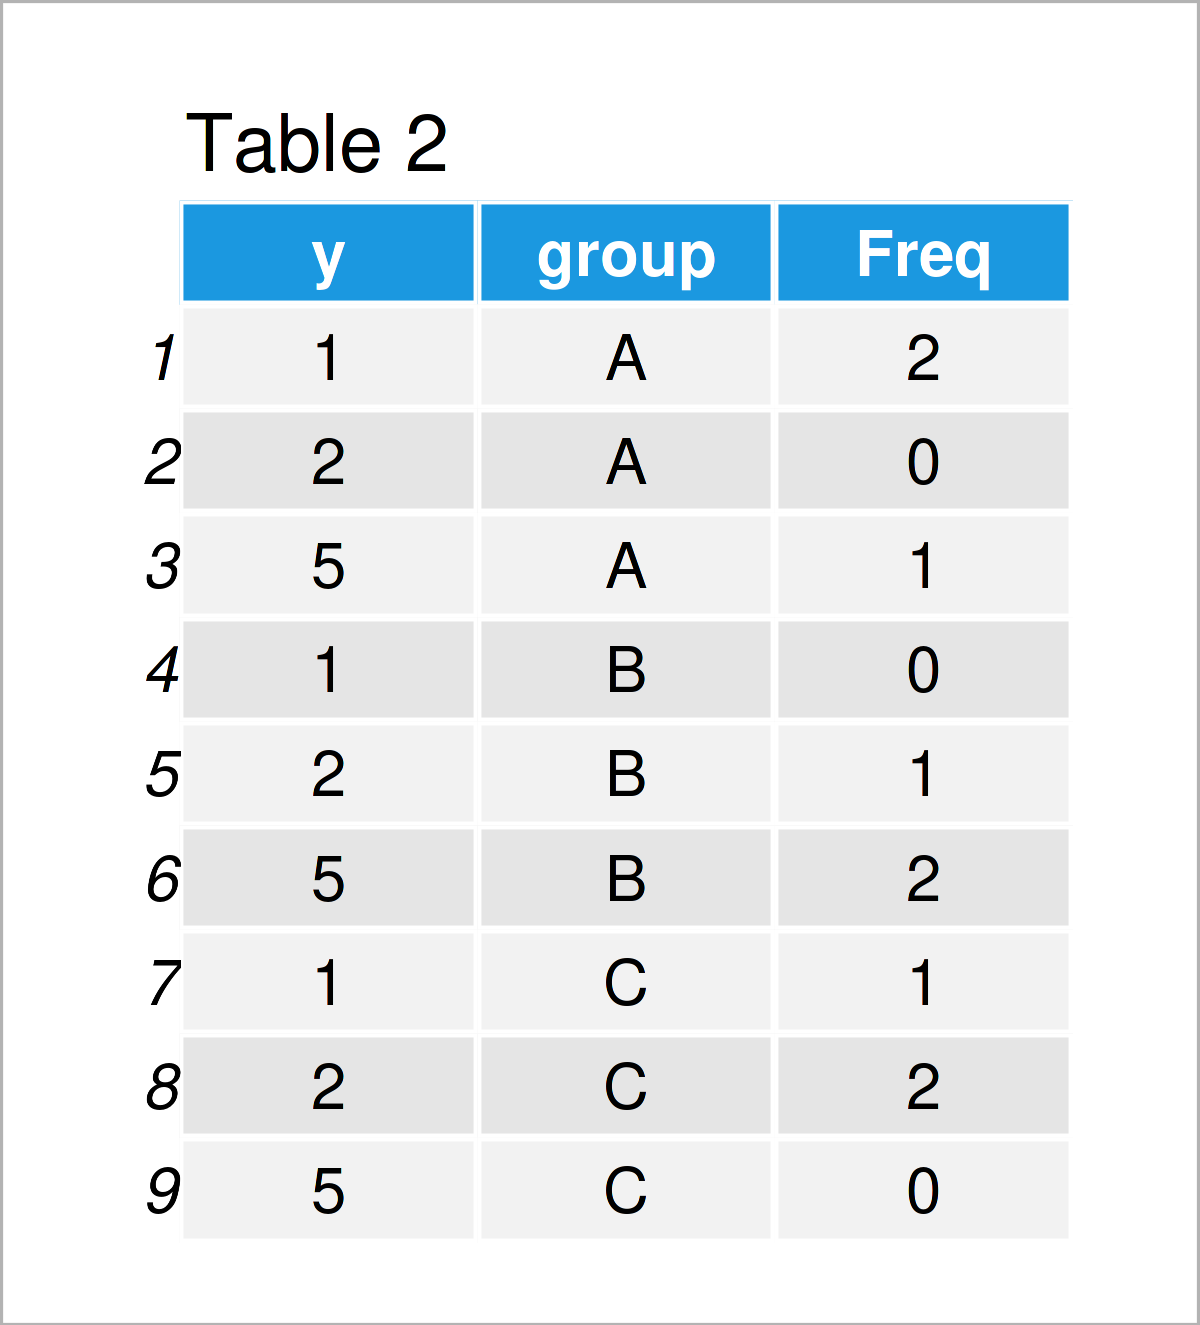 bowl Describe wound Combine Table & Plot in Same Graphic Layout in R | Arrange ggplot2 Grid